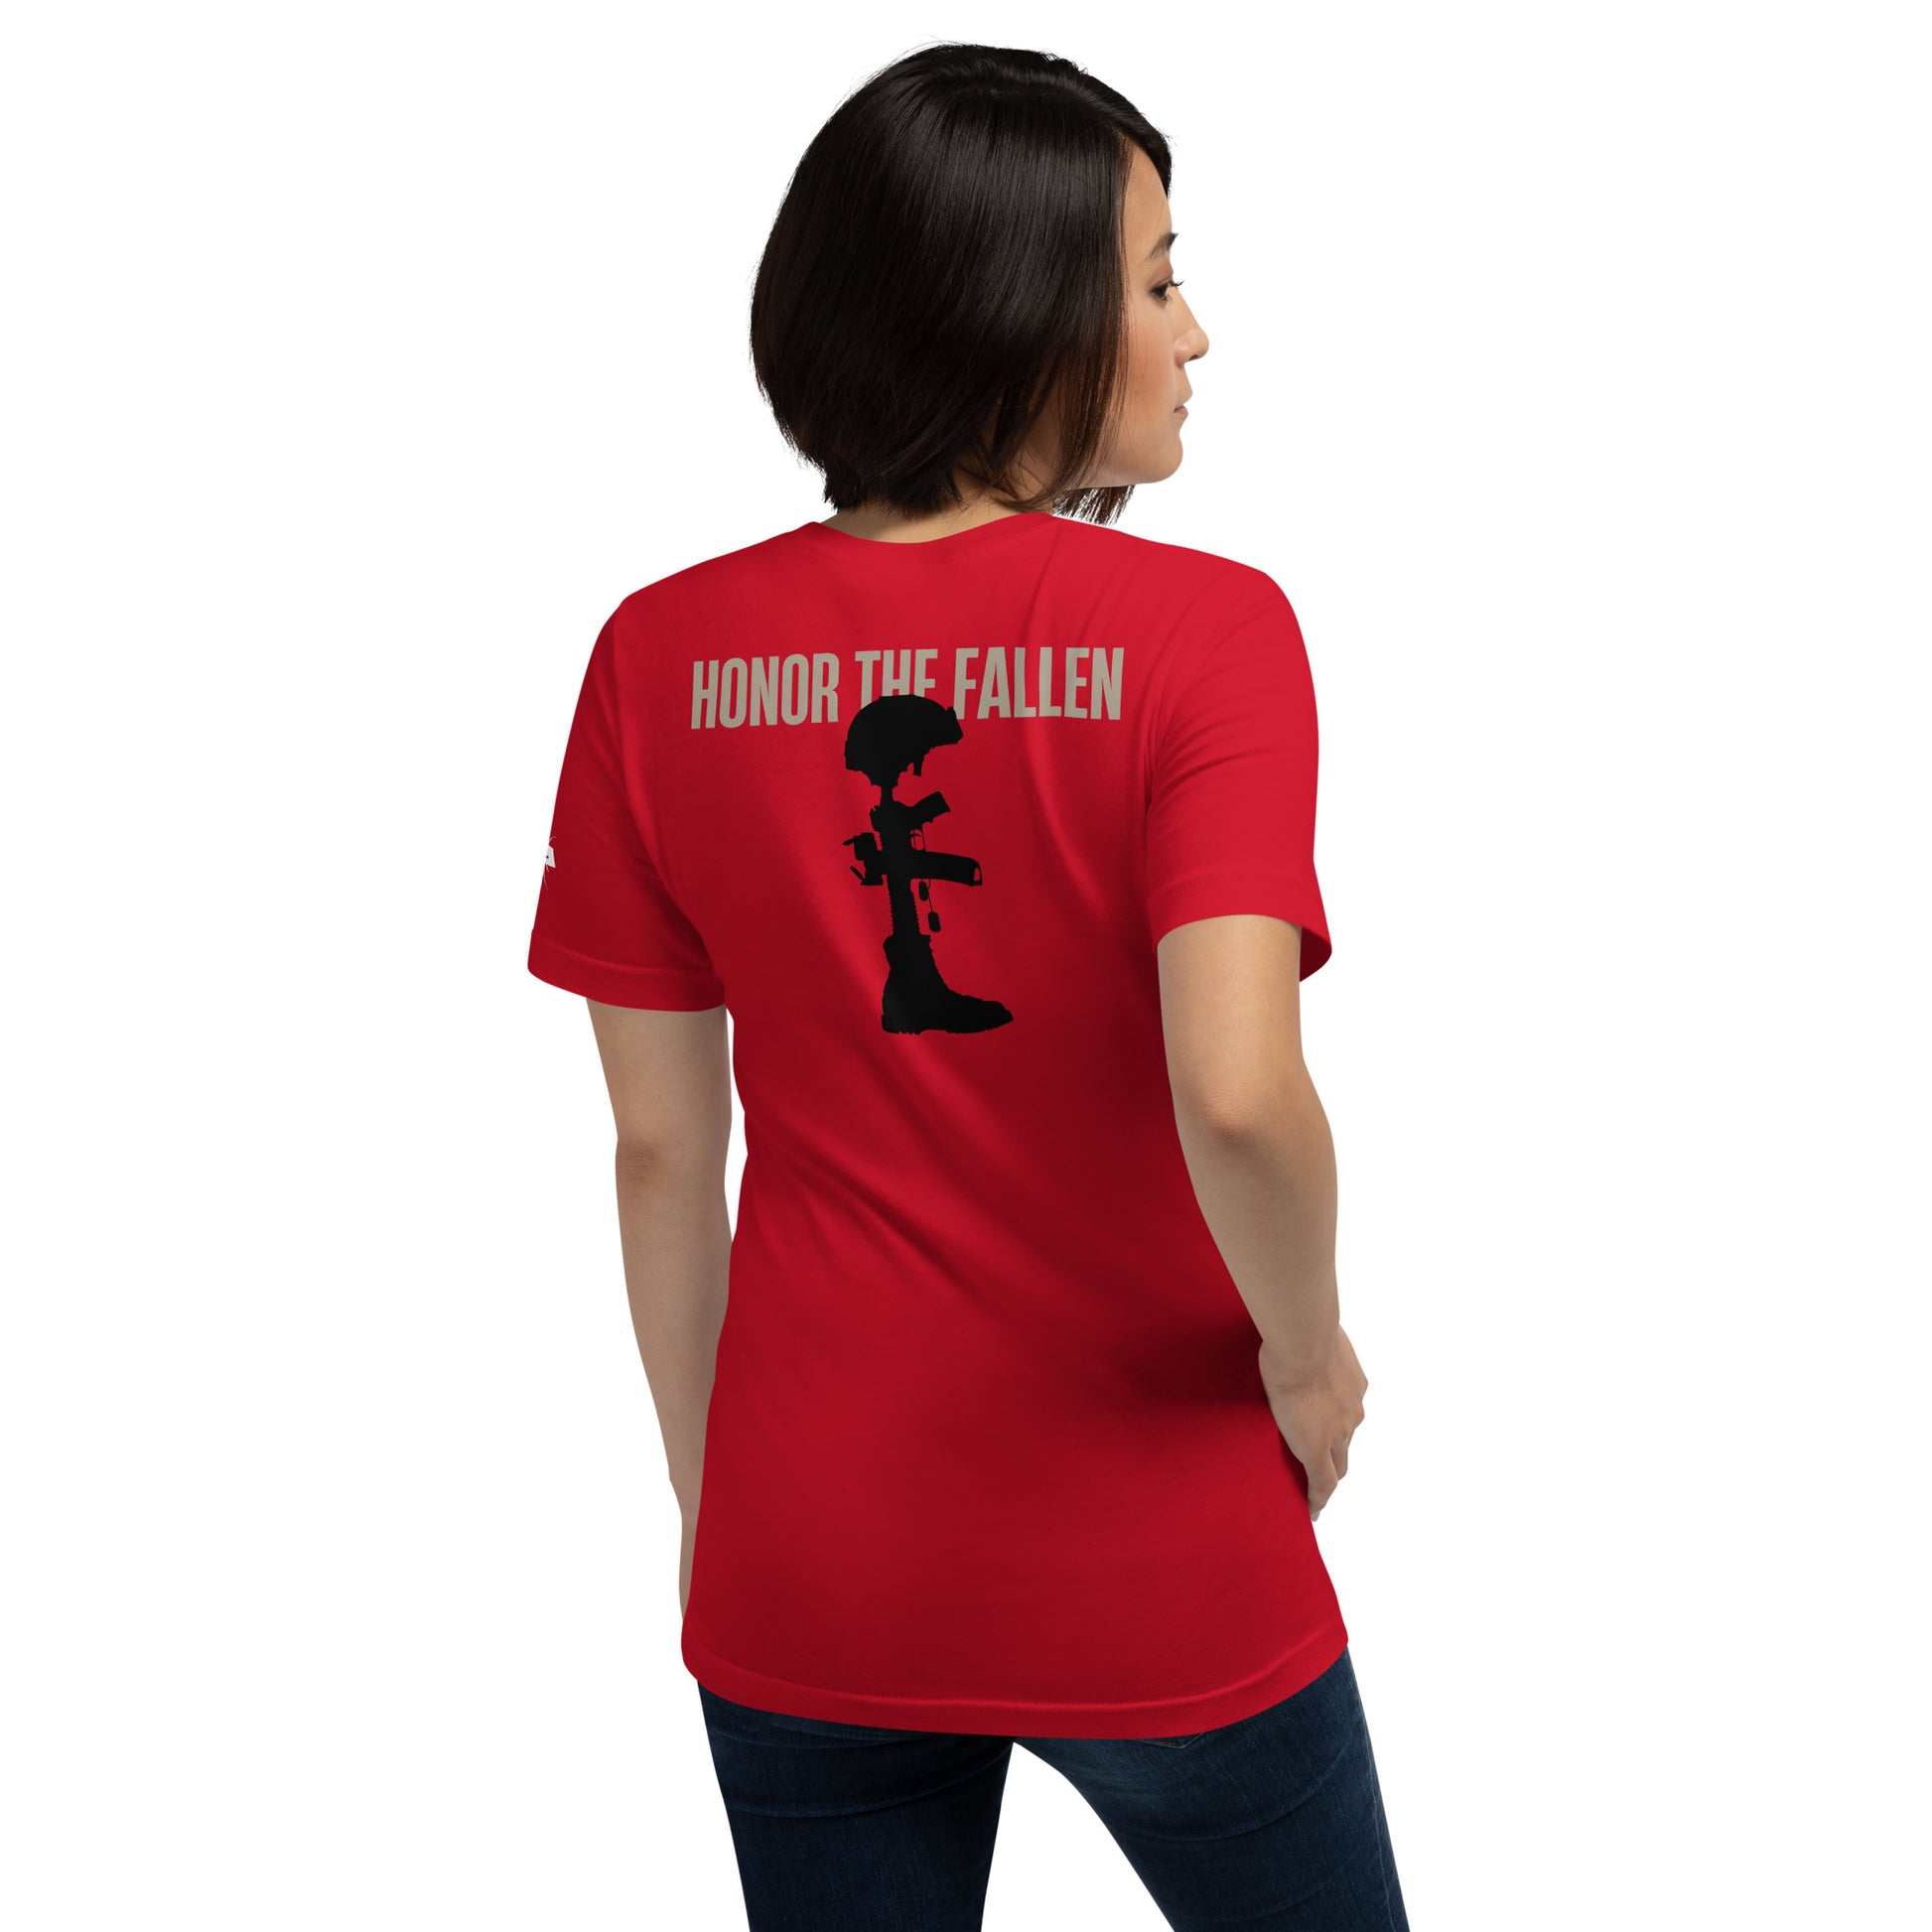 Honor the Fallen T-shirt, a powerful tribute to those who sacrificed for our freedom. Designed for Memorial Day, Red Unisex.